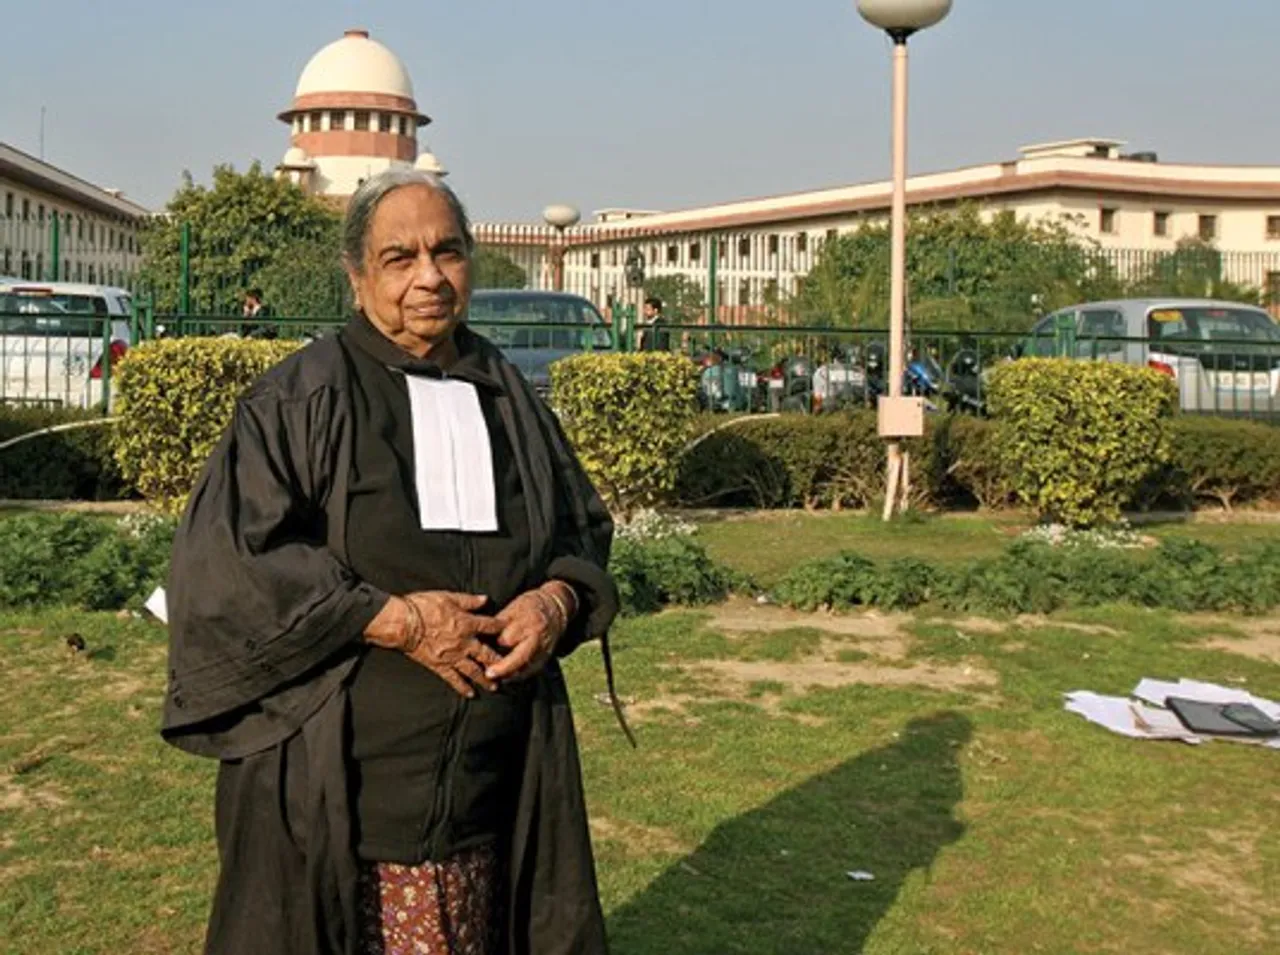 Senior Most Woman Lawyer Of SC, Lily Thomas Passes Away At 91